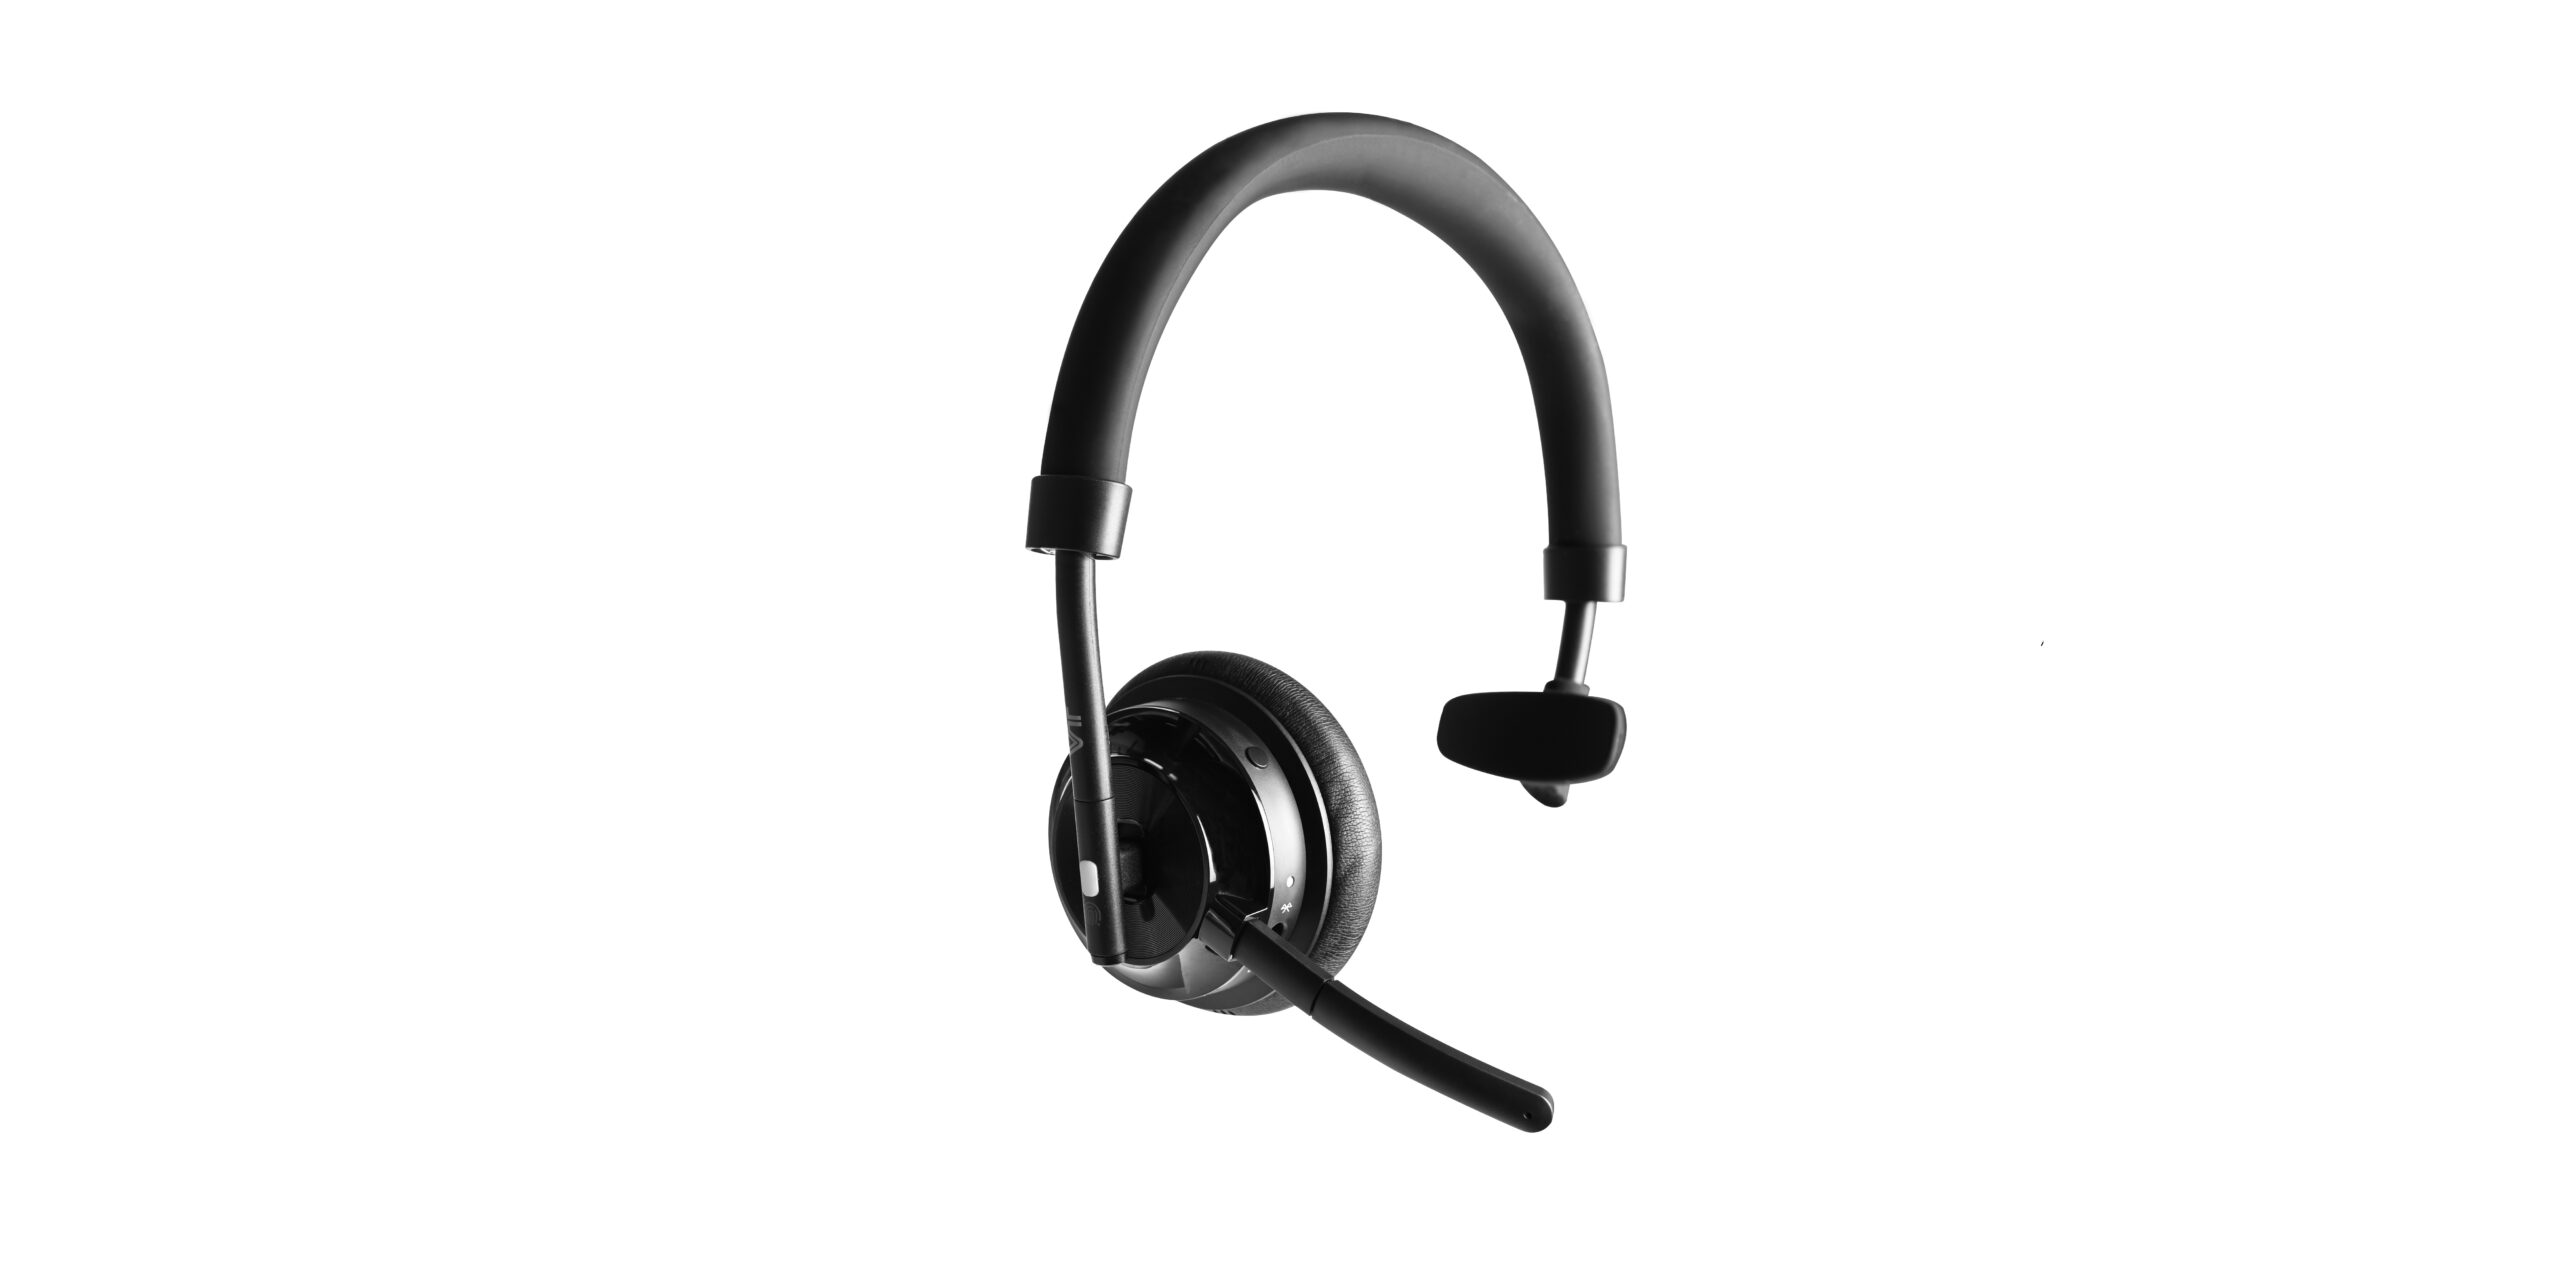 monaural headset that is very comfortable to wear